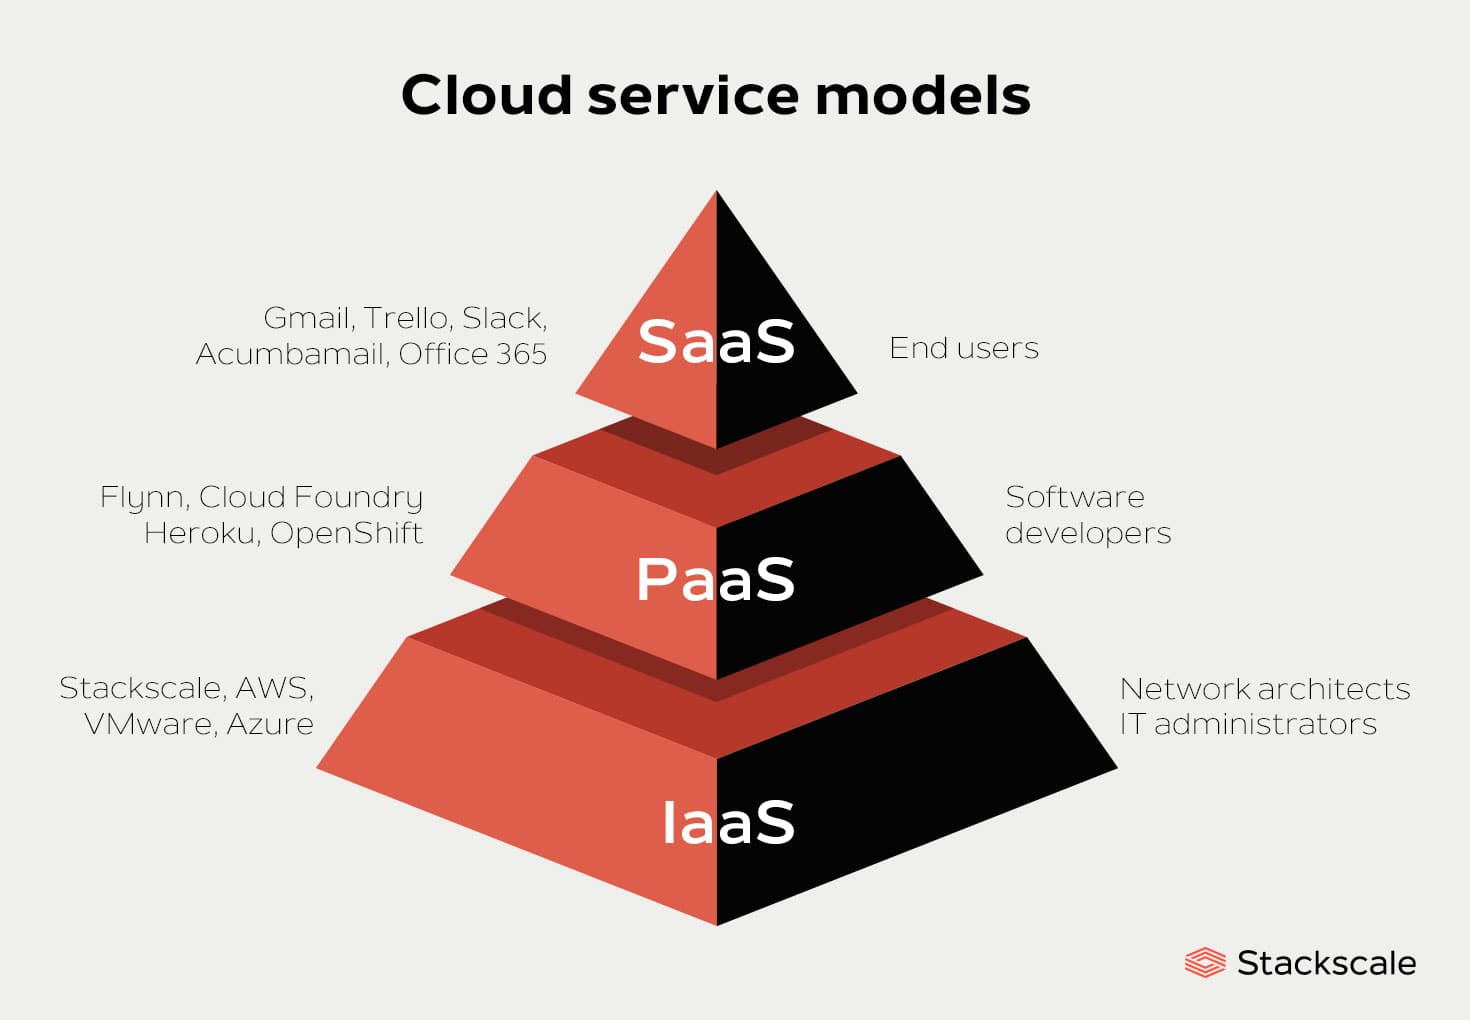 Image depicts the hierarchy of different cloud service models